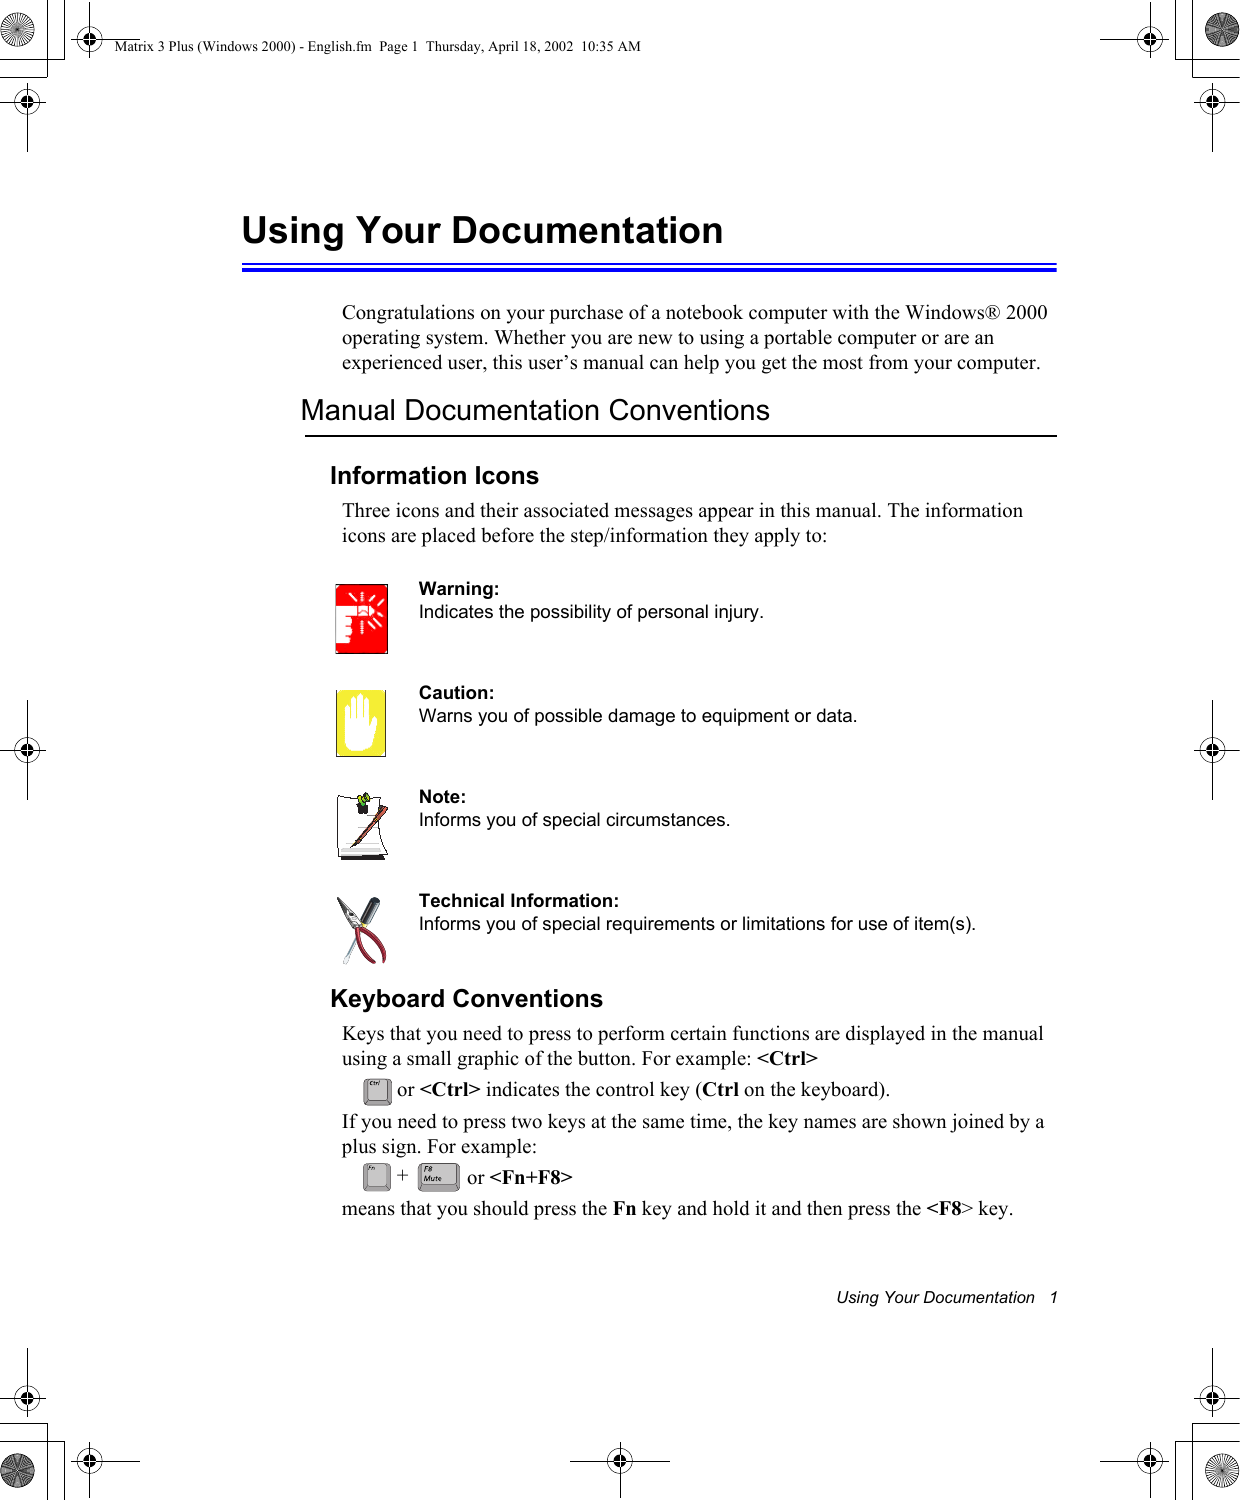 Using Your Documentation   1Using Your DocumentationCongratulations on your purchase of a notebook computer with the Windows® 2000 operating system. Whether you are new to using a portable computer or are an experienced user, this user’s manual can help you get the most from your computer.Manual Documentation ConventionsInformation IconsThree icons and their associated messages appear in this manual. The information icons are placed before the step/information they apply to:Warning:Indicates the possibility of personal injury.Caution:Warns you of possible damage to equipment or data.Note:Informs you of special circumstances.Technical Information:Informs you of special requirements or limitations for use of item(s).Keyboard ConventionsKeys that you need to press to perform certain functions are displayed in the manual using a small graphic of the button. For example: &lt;Ctrl&gt; or &lt;Ctrl&gt; indicates the control key (Ctrl on the keyboard). If you need to press two keys at the same time, the key names are shown joined by a plus sign. For example: or &lt;Fn+F8&gt;means that you should press the Fn key and hold it and then press the &lt;F8&gt; key.+Matrix 3 Plus (Windows 2000) - English.fm  Page 1  Thursday, April 18, 2002  10:35 AM